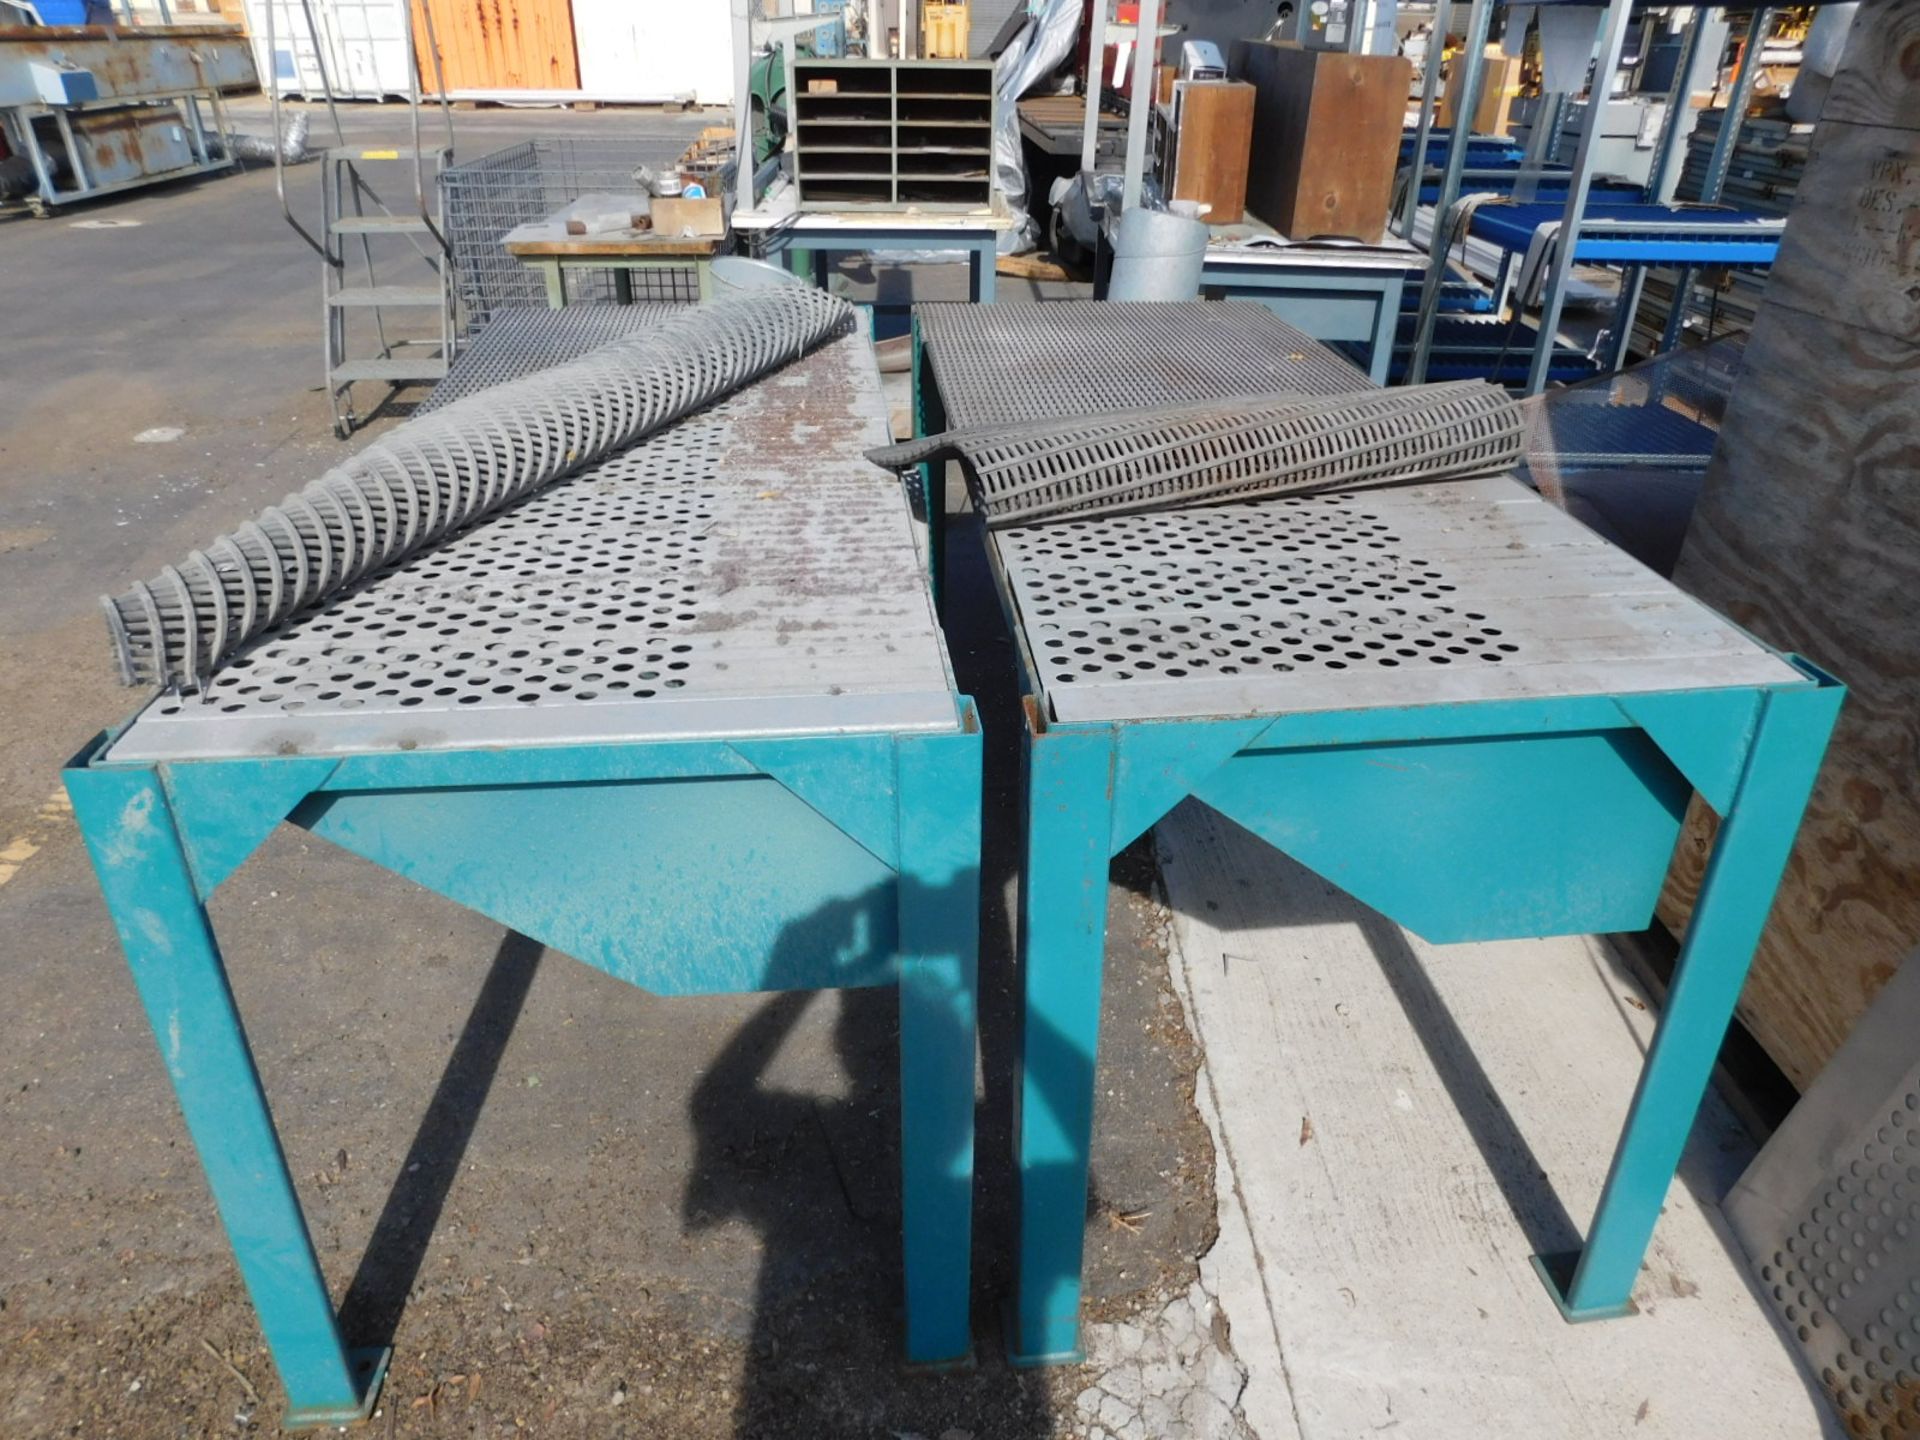 LOT - (2) VACUUM SANDING TABLES, EACH TABLE MEASURES 6' X 30", 36" WORKING HEIGHT - Image 2 of 2